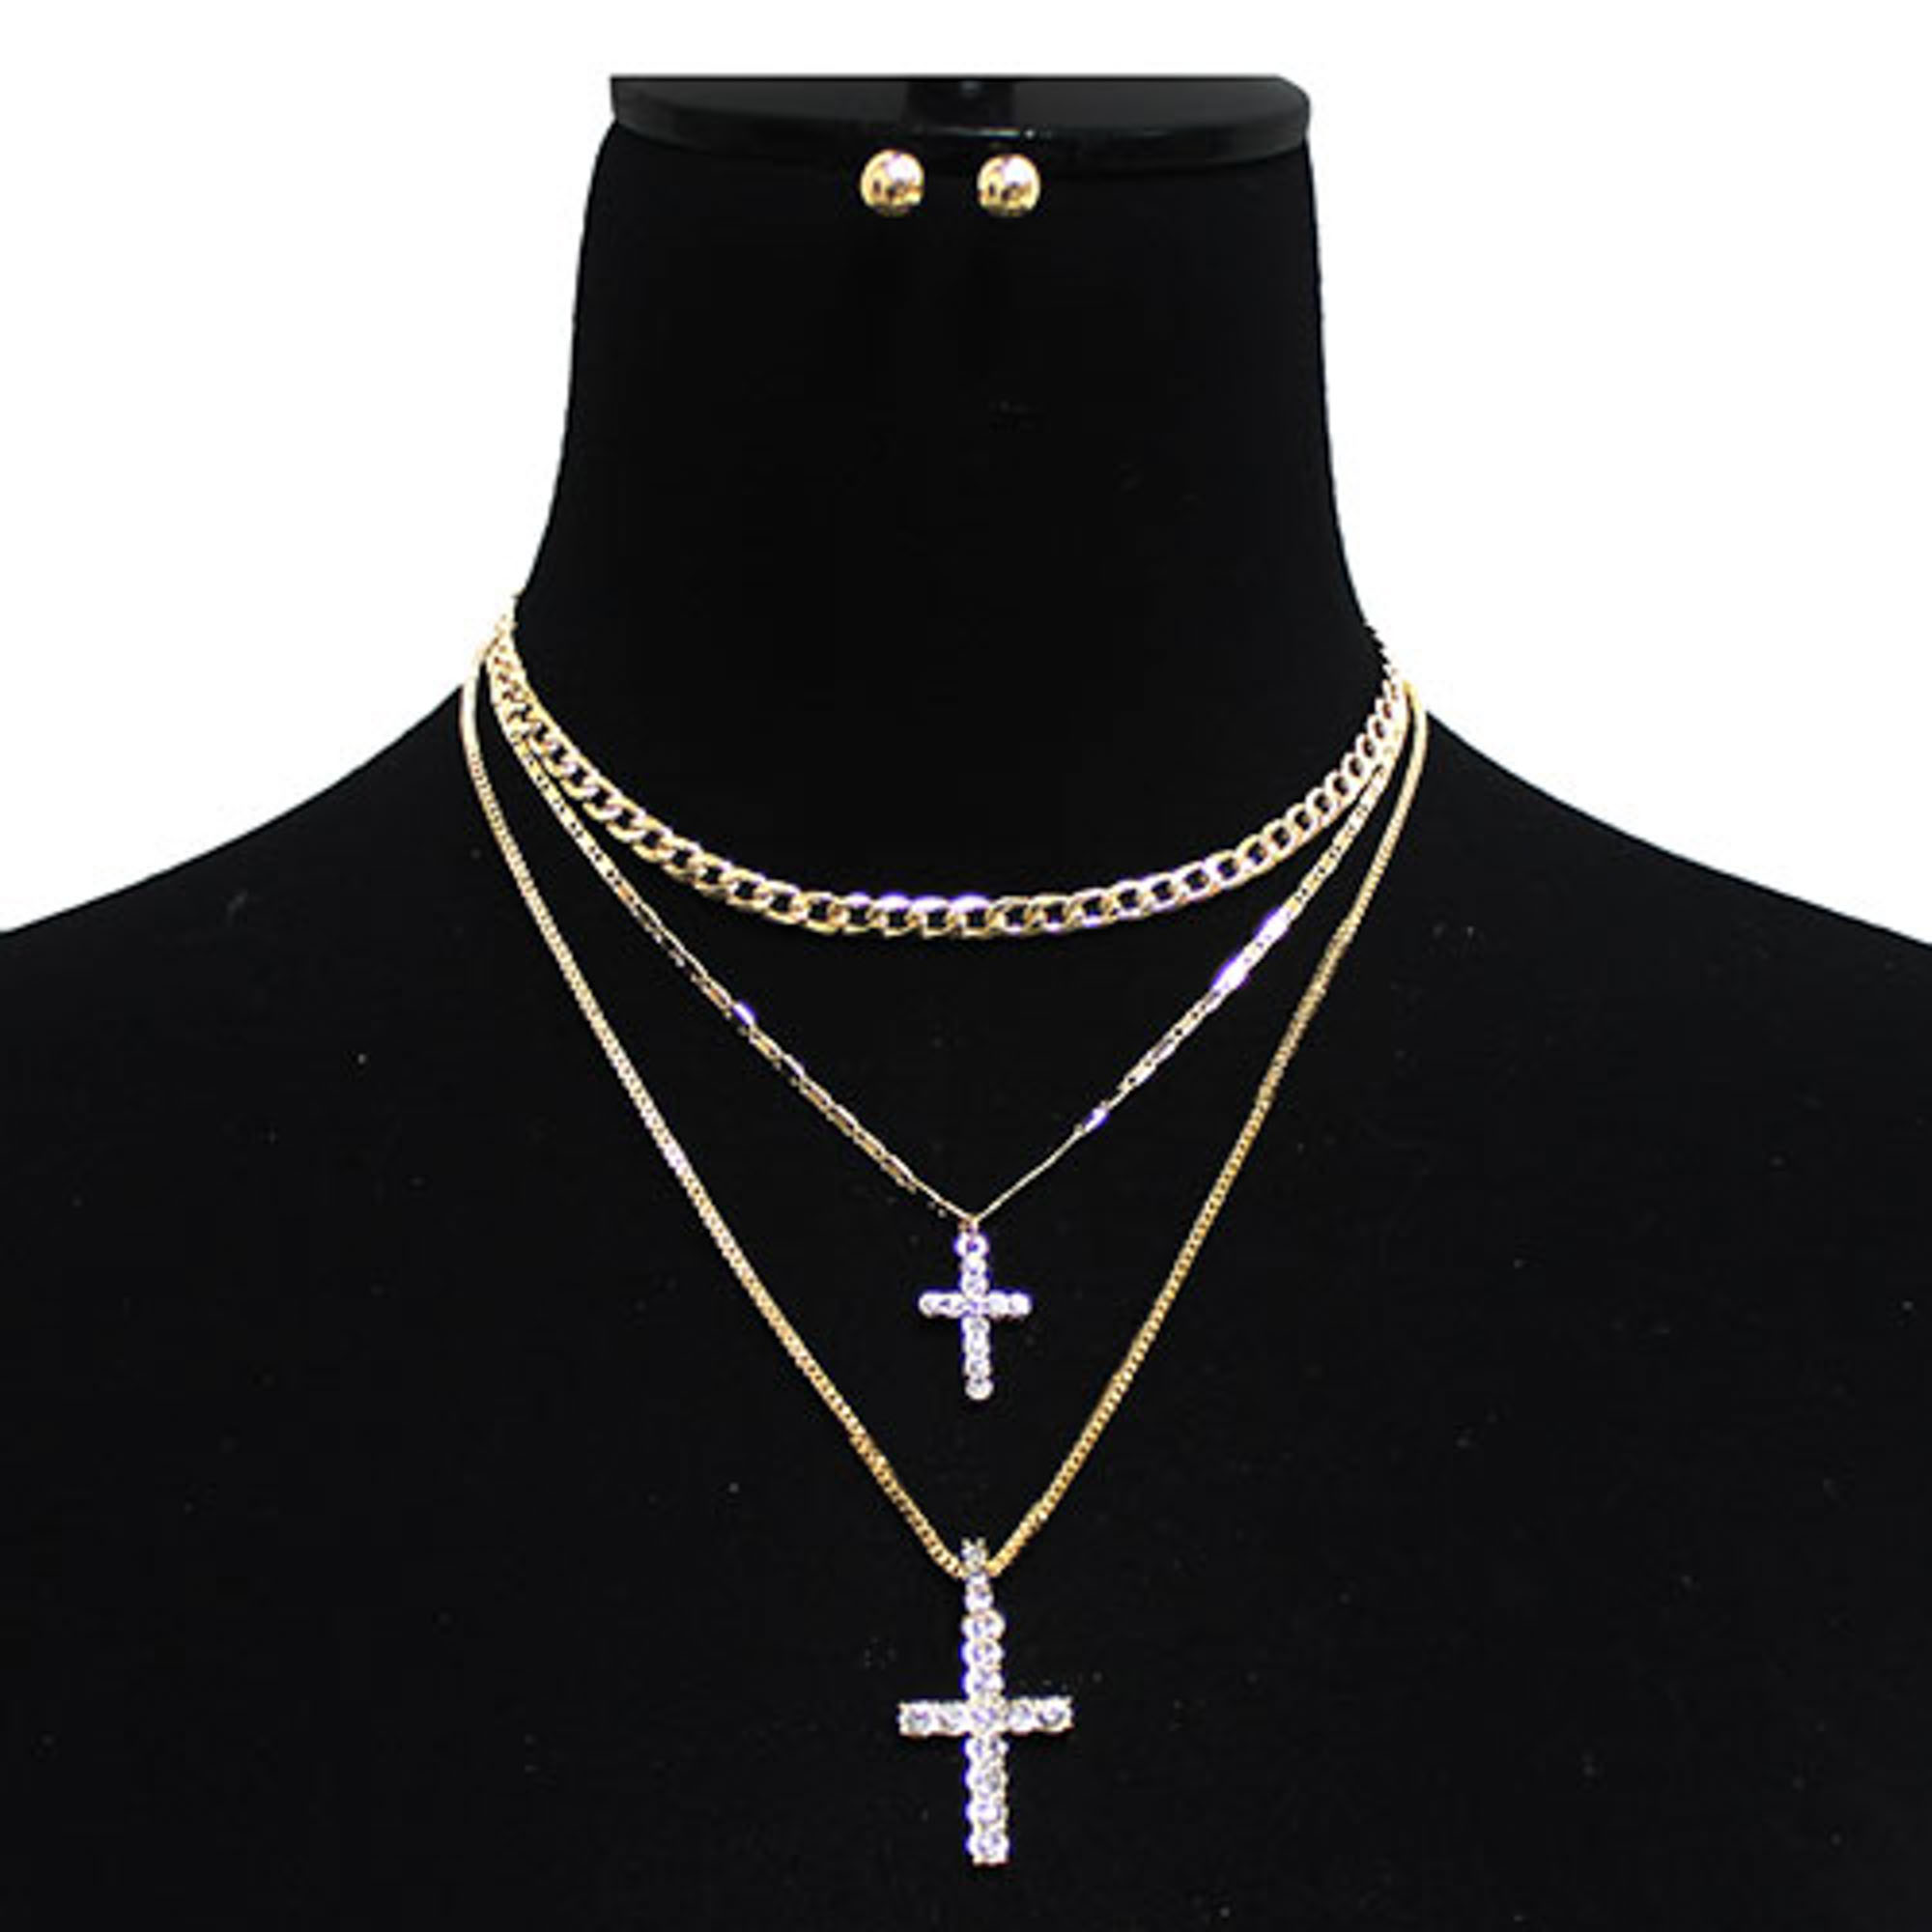 TRIPLE LAYER RHINESTONE DOUBLE CROSS NECKLACE WITH EARRING SET